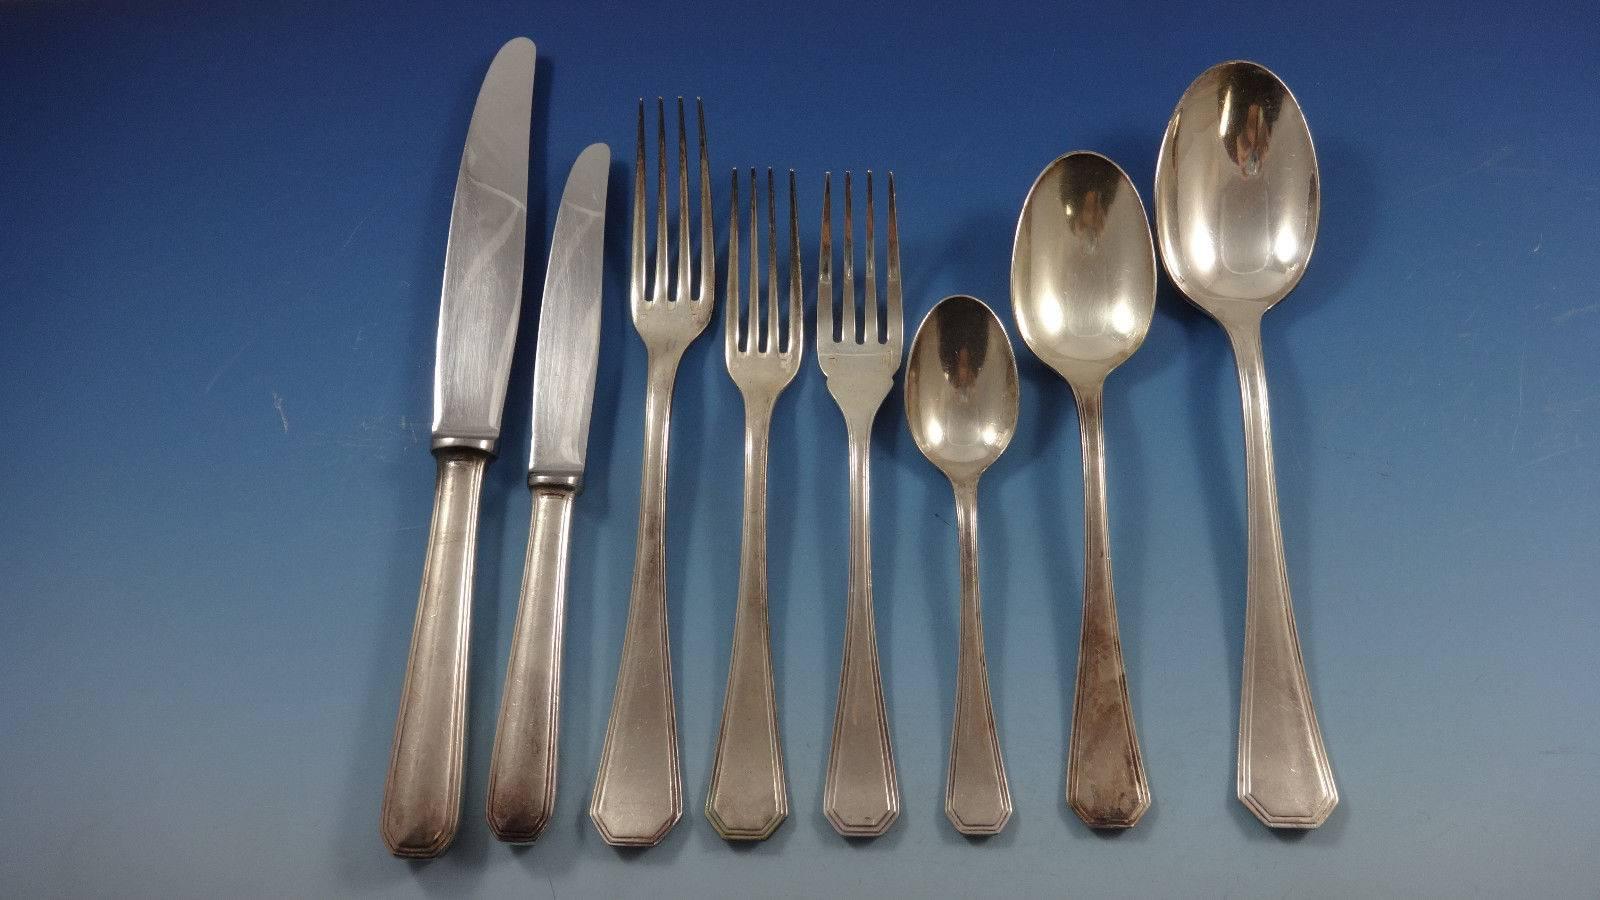 Christofle set.
Estate America by Christofle (France) silver plated flatware set - 64 pieces. This set includes:

Eight dinner size knives, 9 7/8